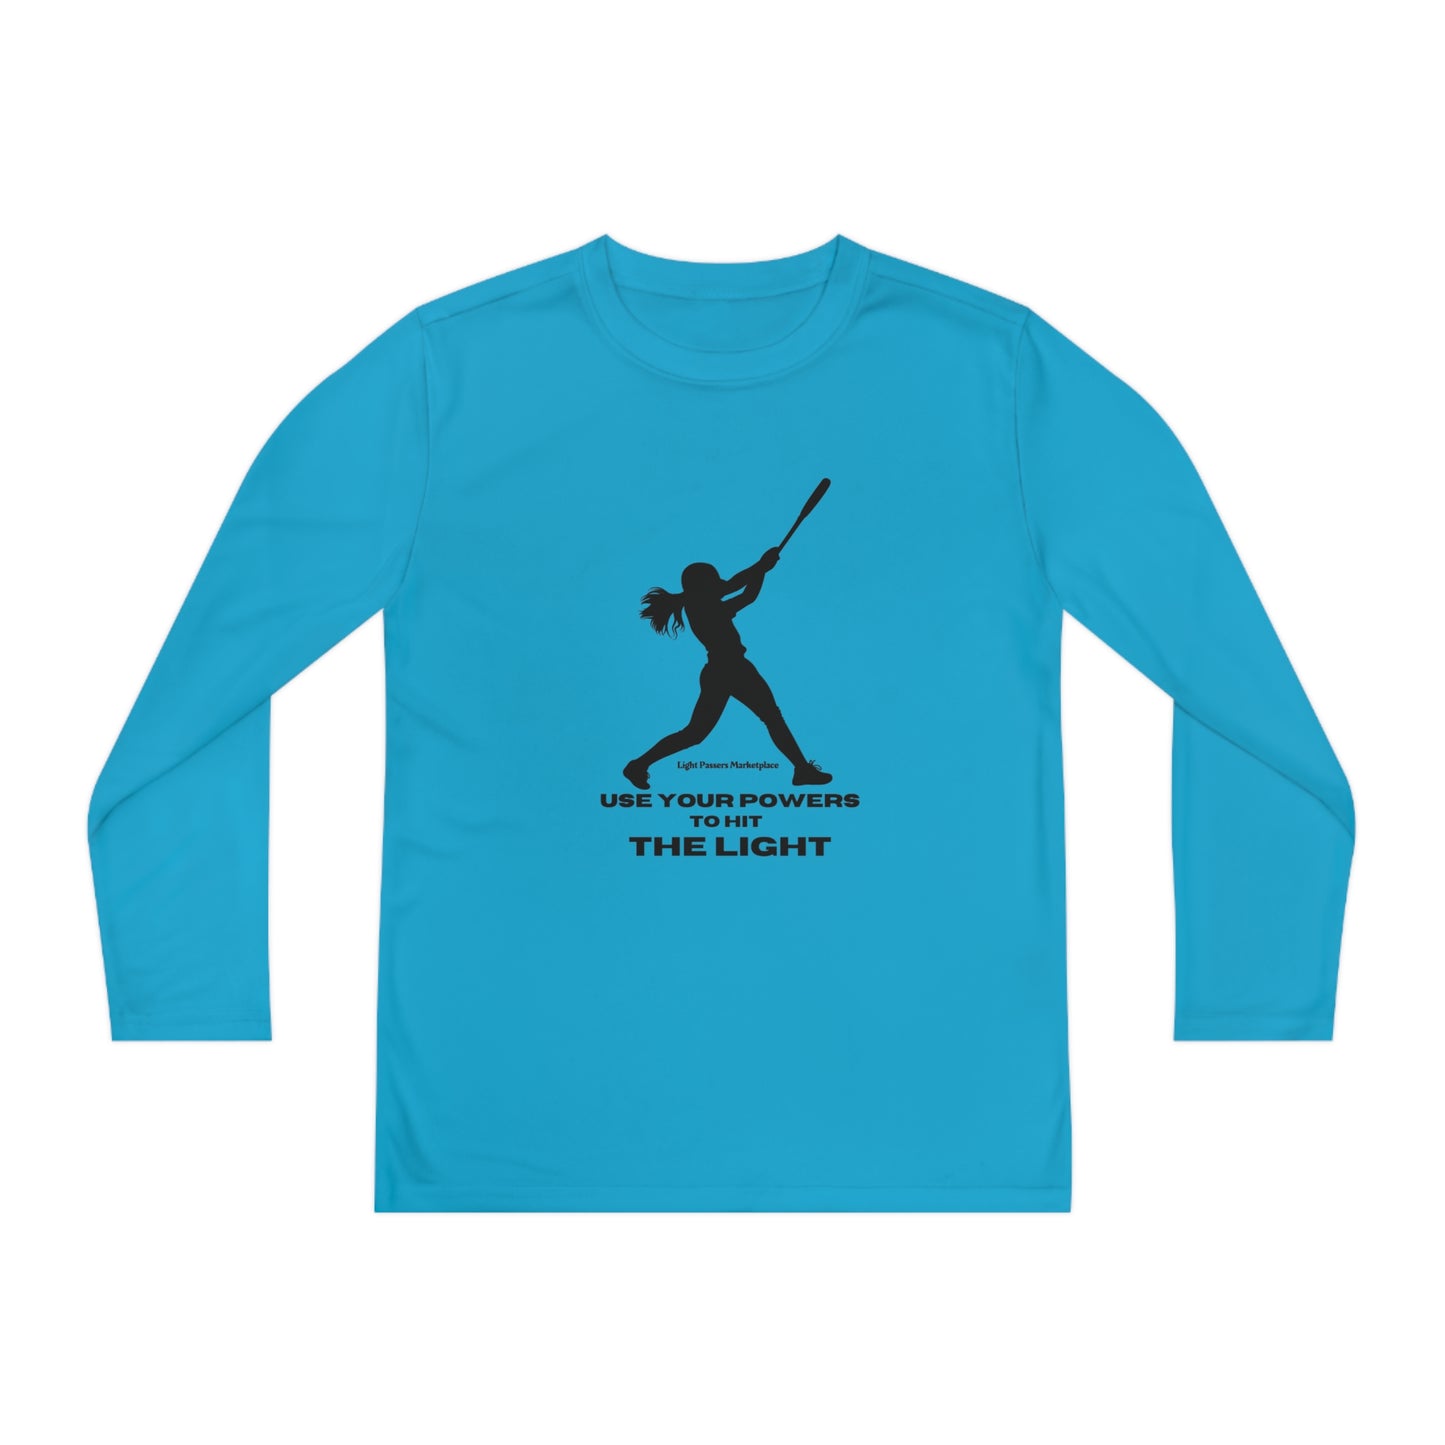 Youth long sleeve blue shirt with a girl swinging a bat silhouette, ideal for active kids. Made of 100% moisture-wicking polyester, lightweight, and breathable for comfort during sports.